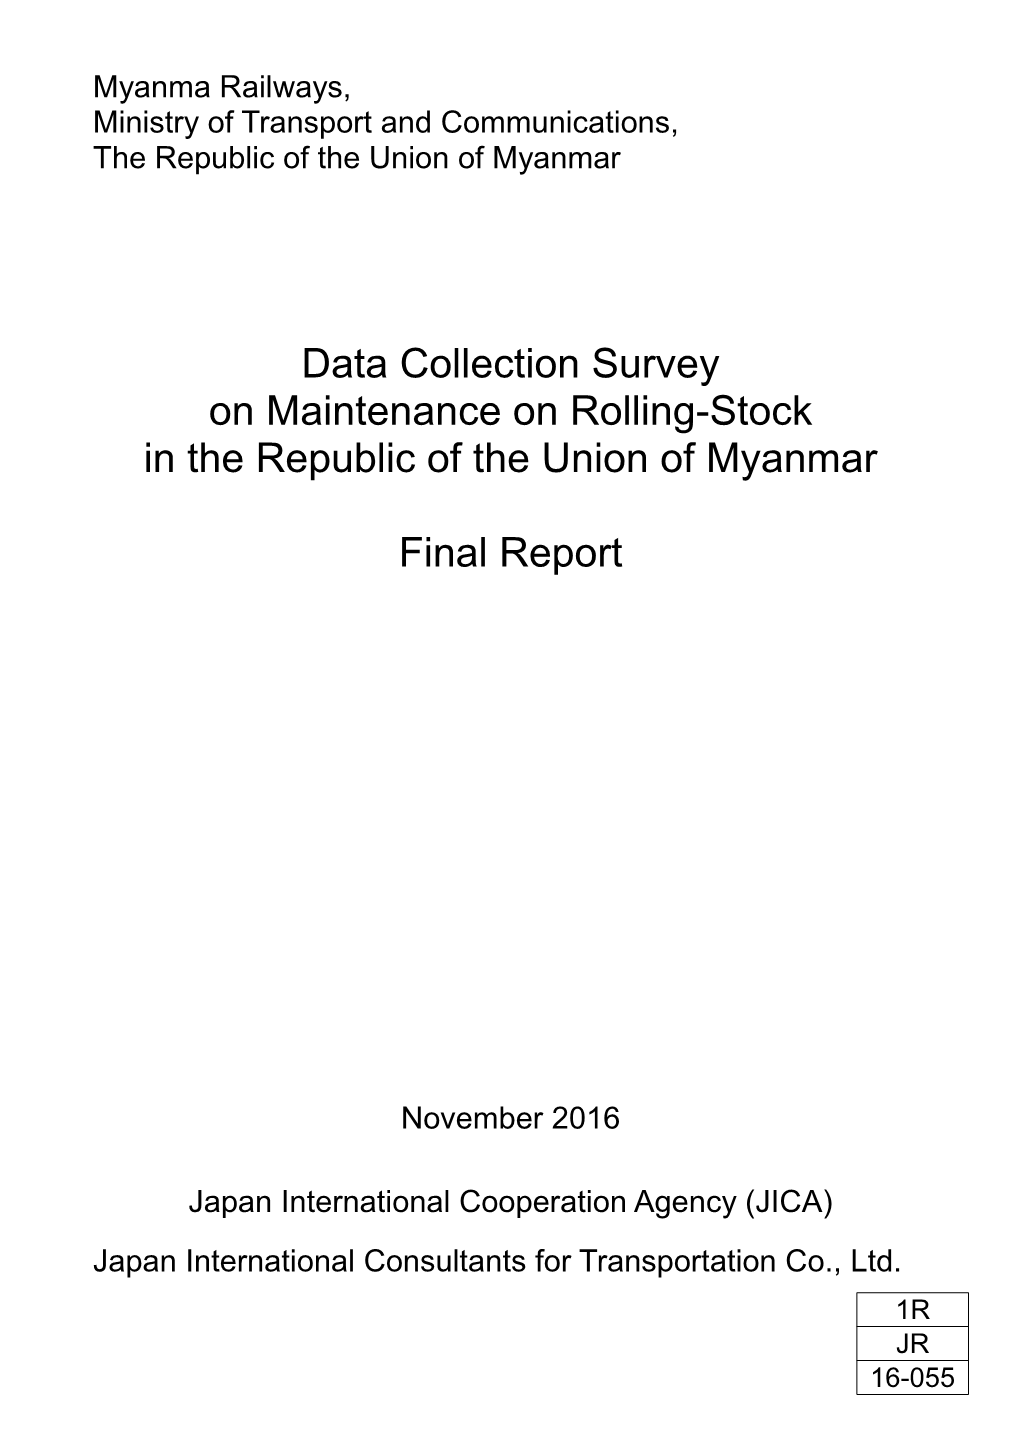 Data Collection Survey on Maintenance on Rolling-Stock in the Republic of the Union of Myanmar